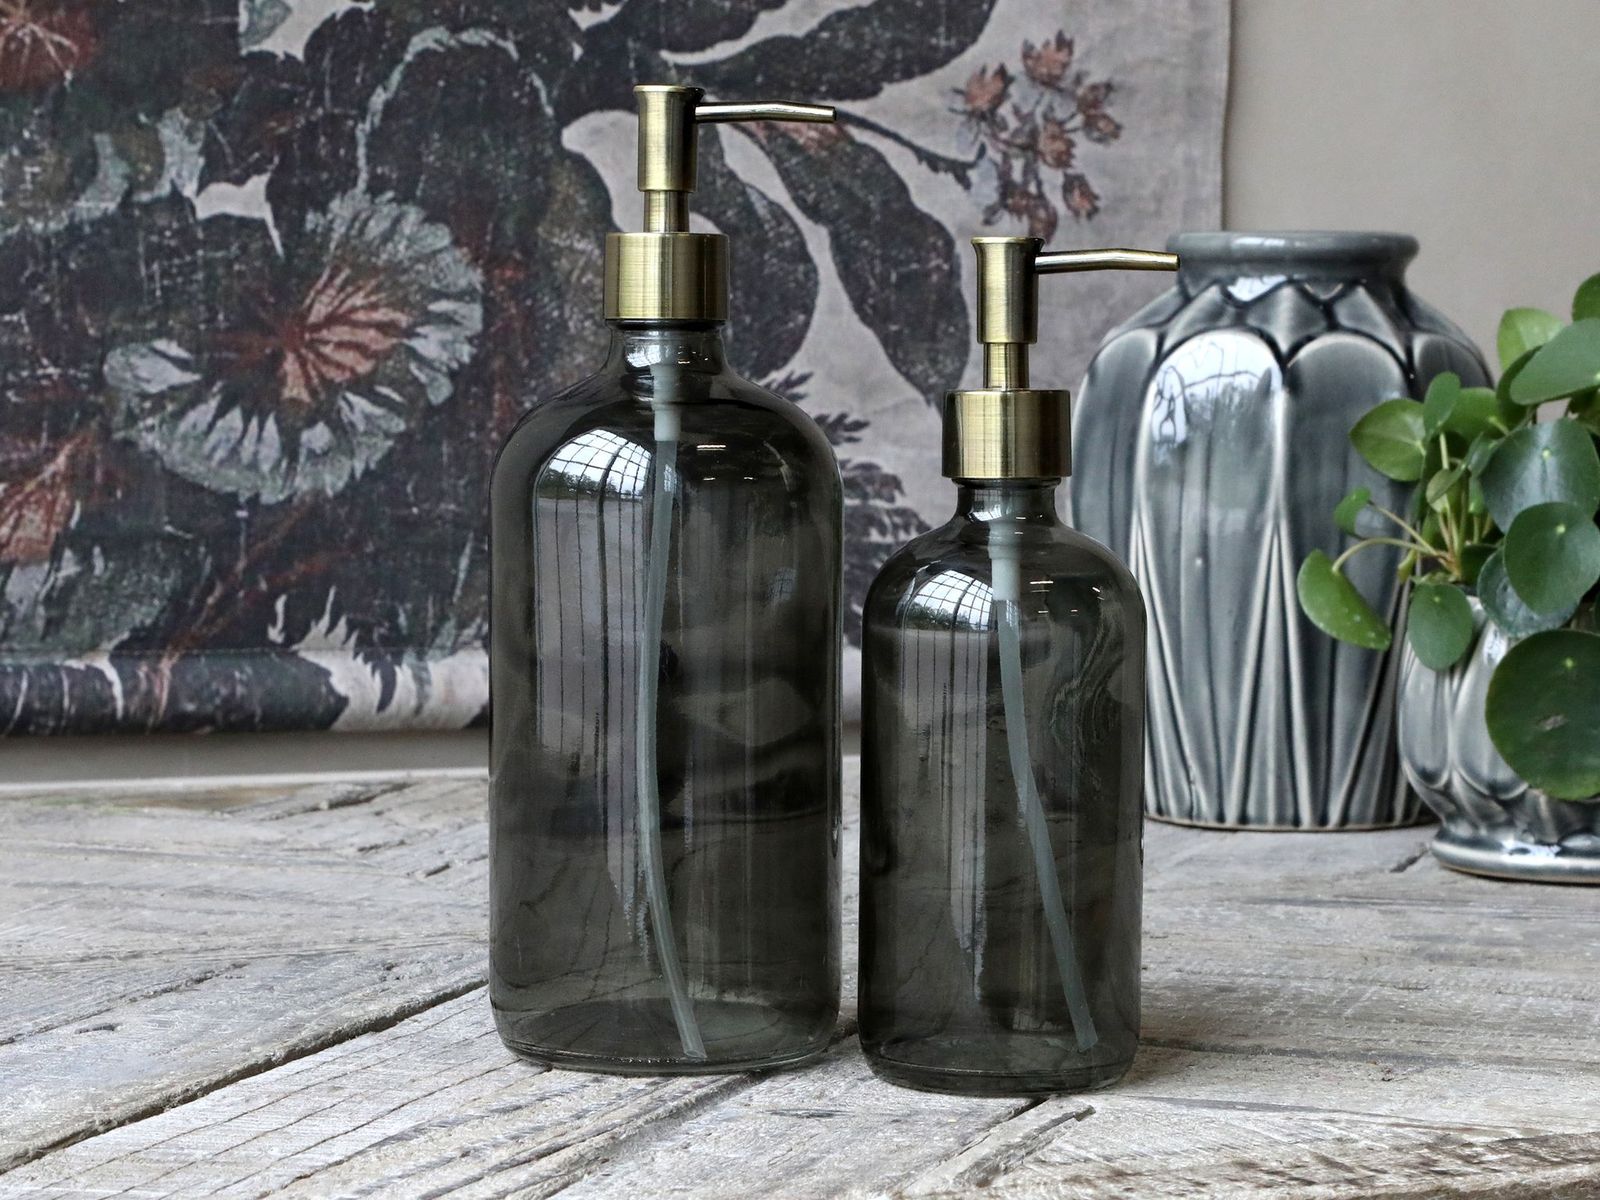 Rustic Charcoal Glass Soap Dispenser With Pump - My Rustic Home